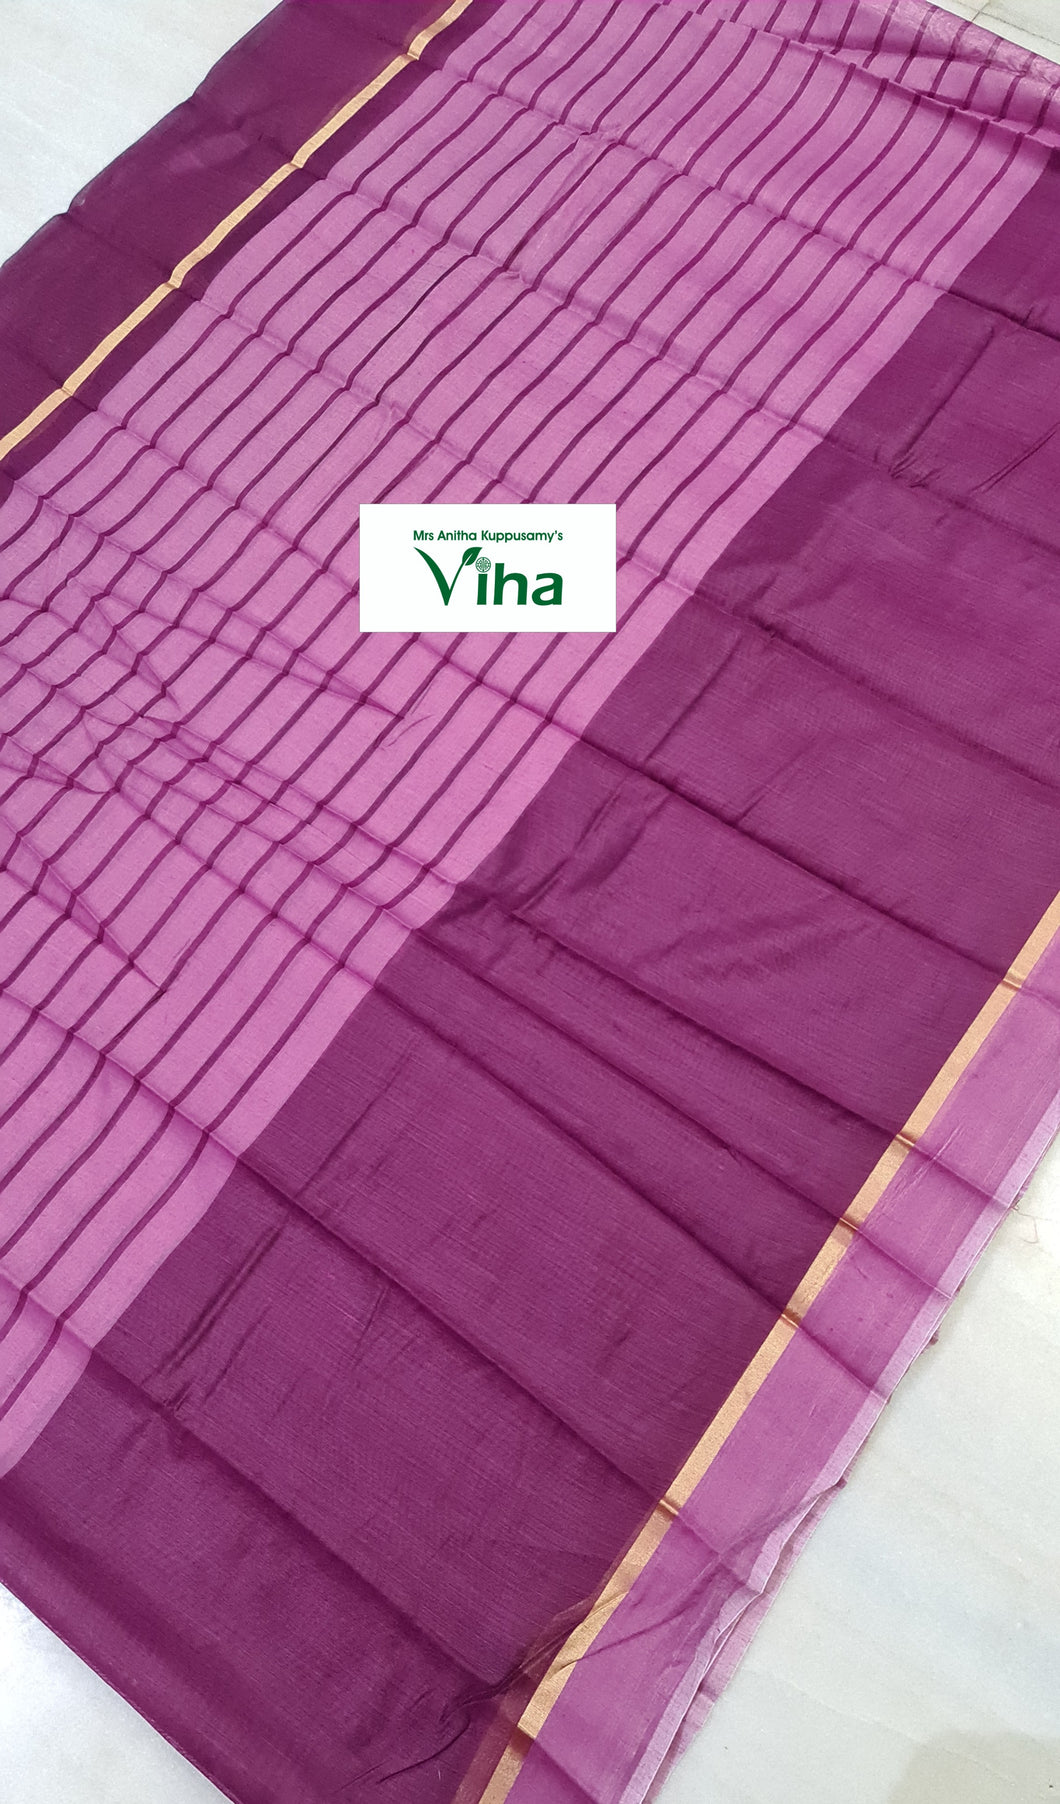 Soft cotton saree (inclu ding of all taxes)